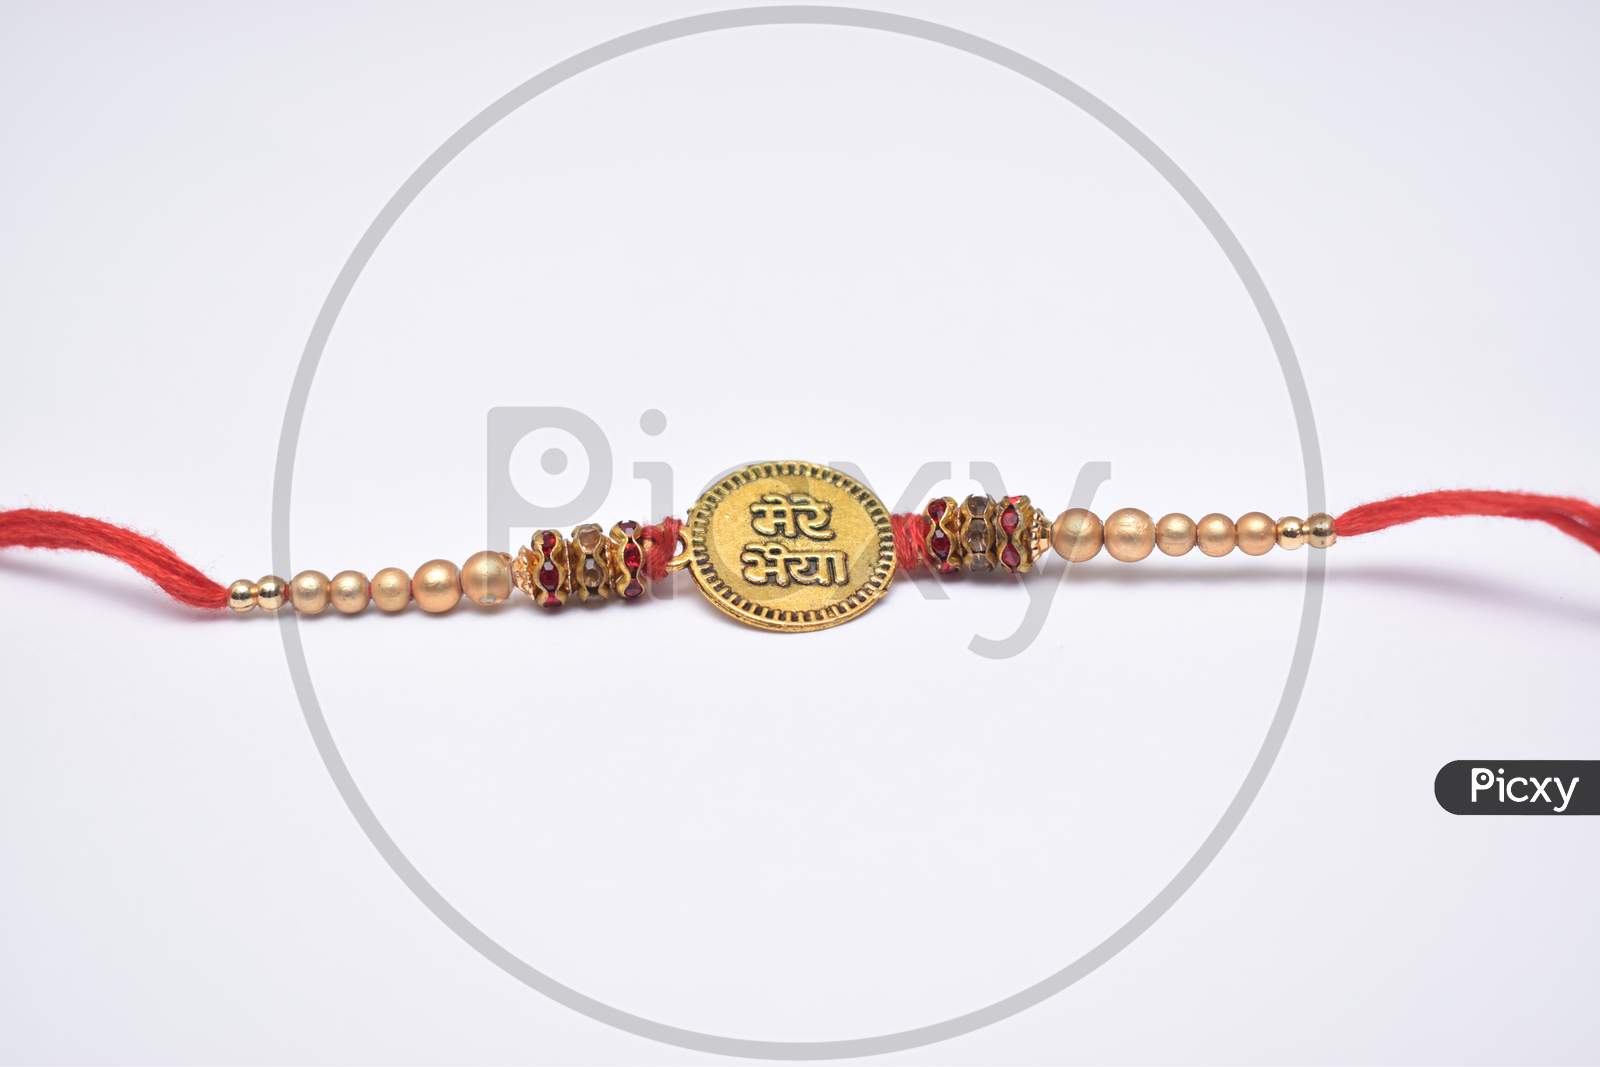 Closeup Shot Of Rakhi With Bhai (Brother) Written On It And Decorated With Beads And Red Thread On White Background